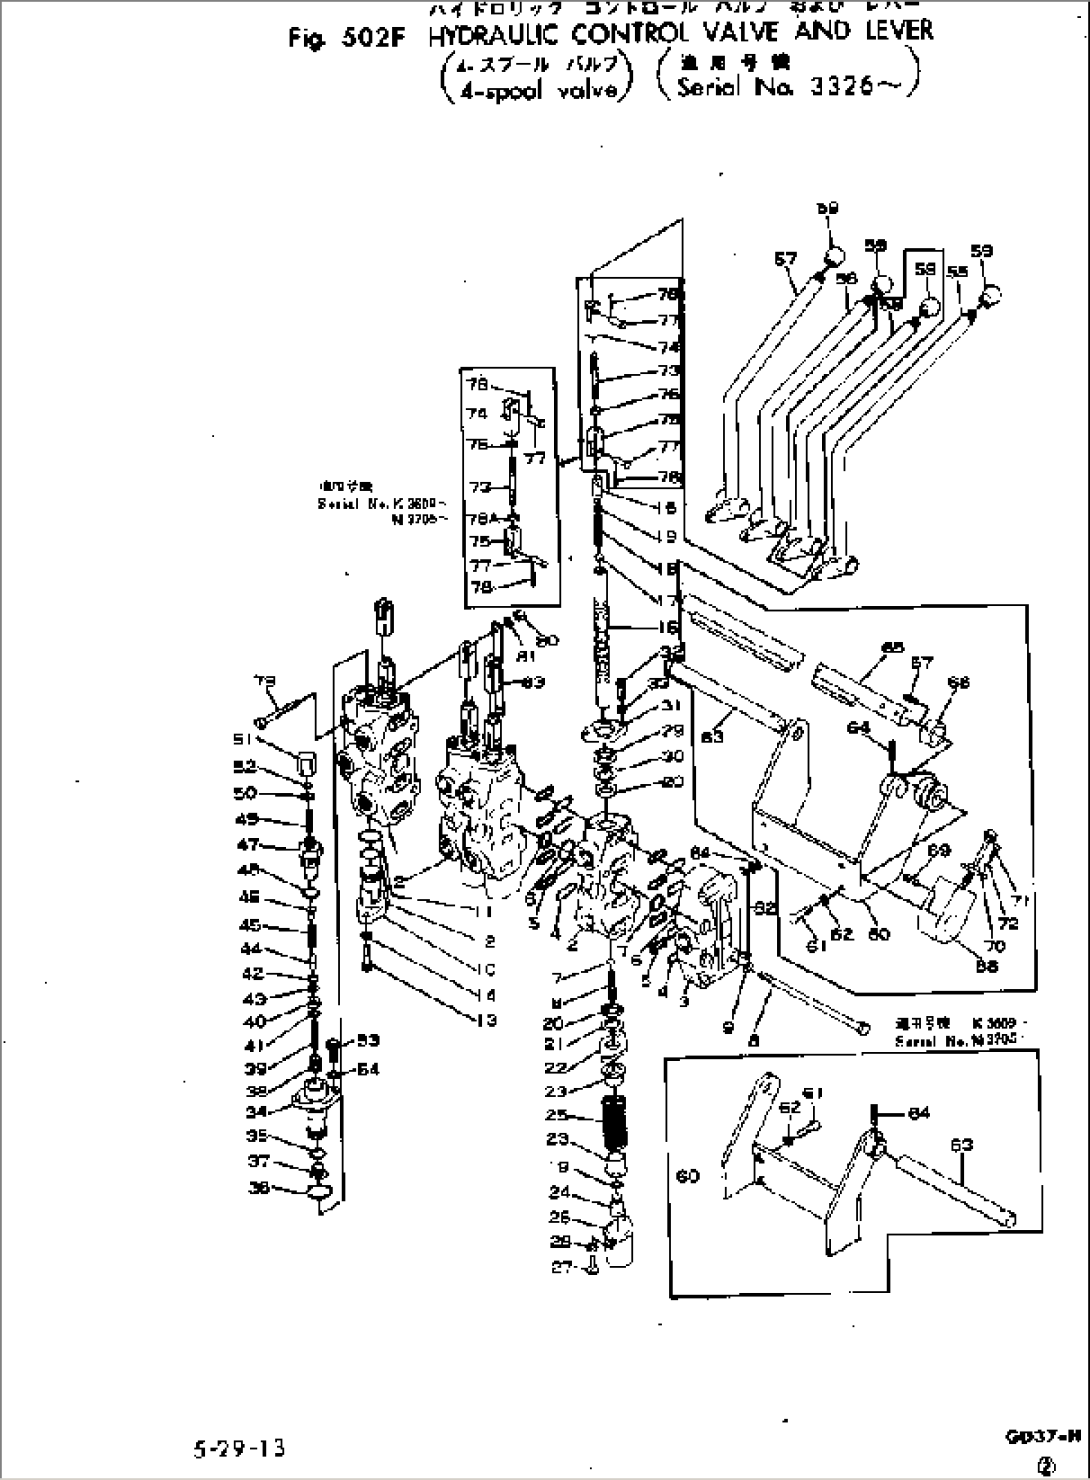 HYDRAULIC CONTROL VALVE AND LEVER (4-SPOOL)(#3326-)